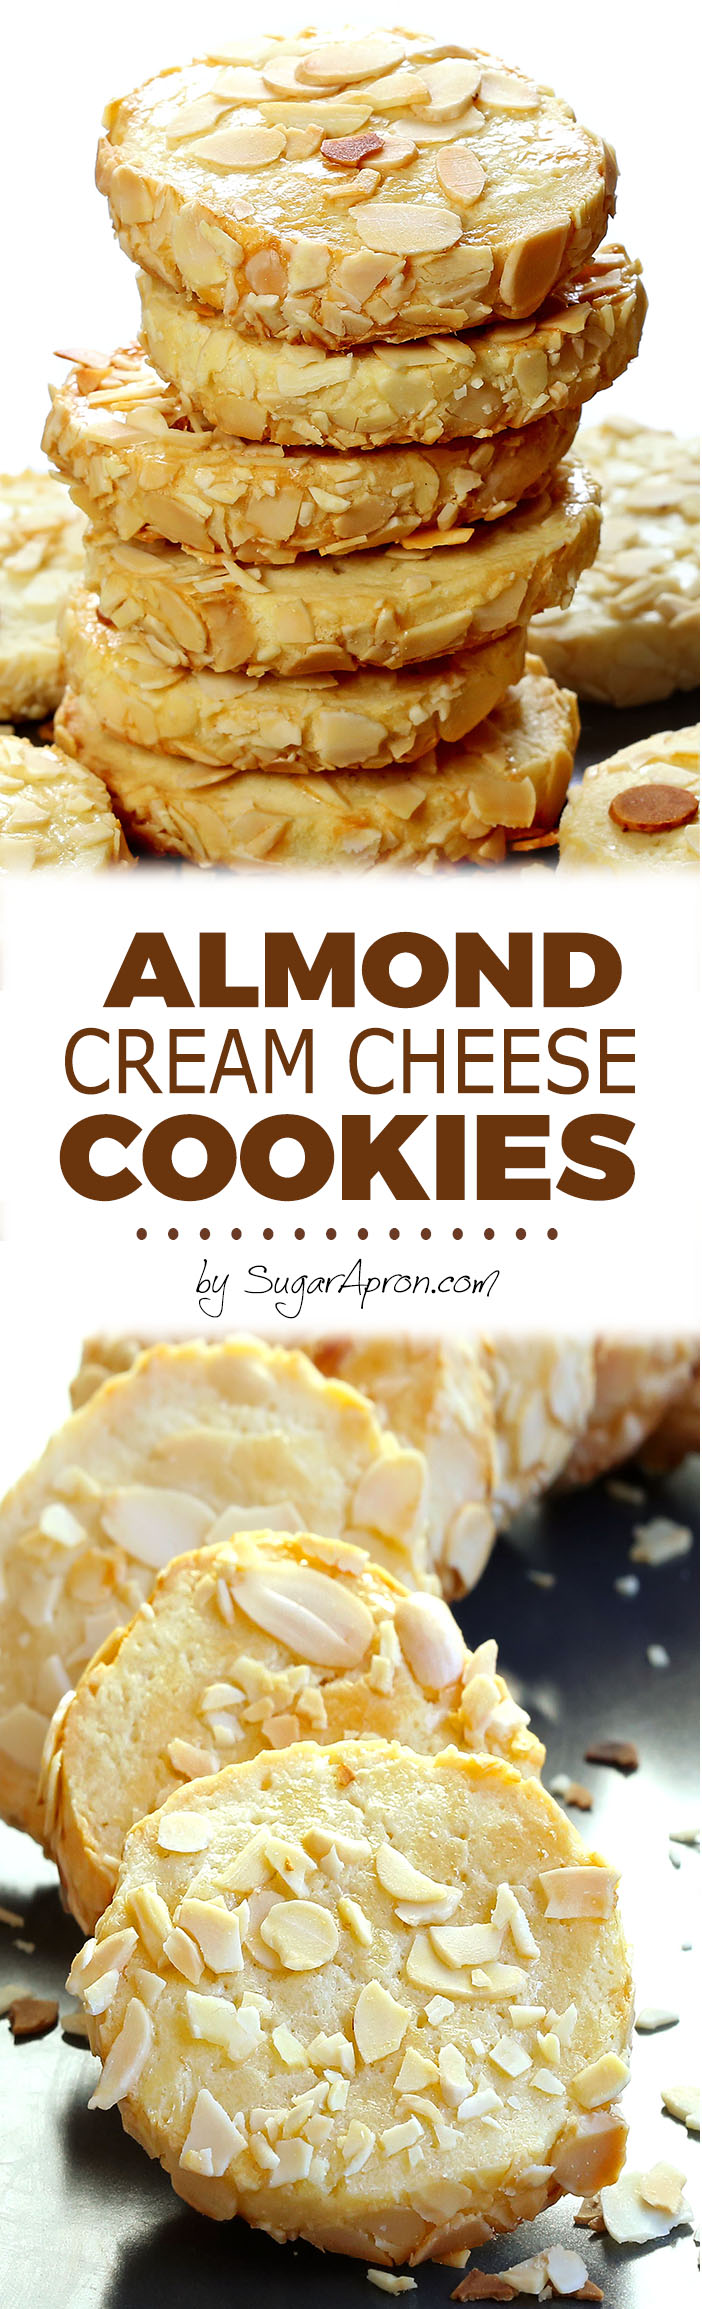 Buttery melt-in-your-mouth sugar cookies with the tang of cream cheese and garnished with slivered almonds.